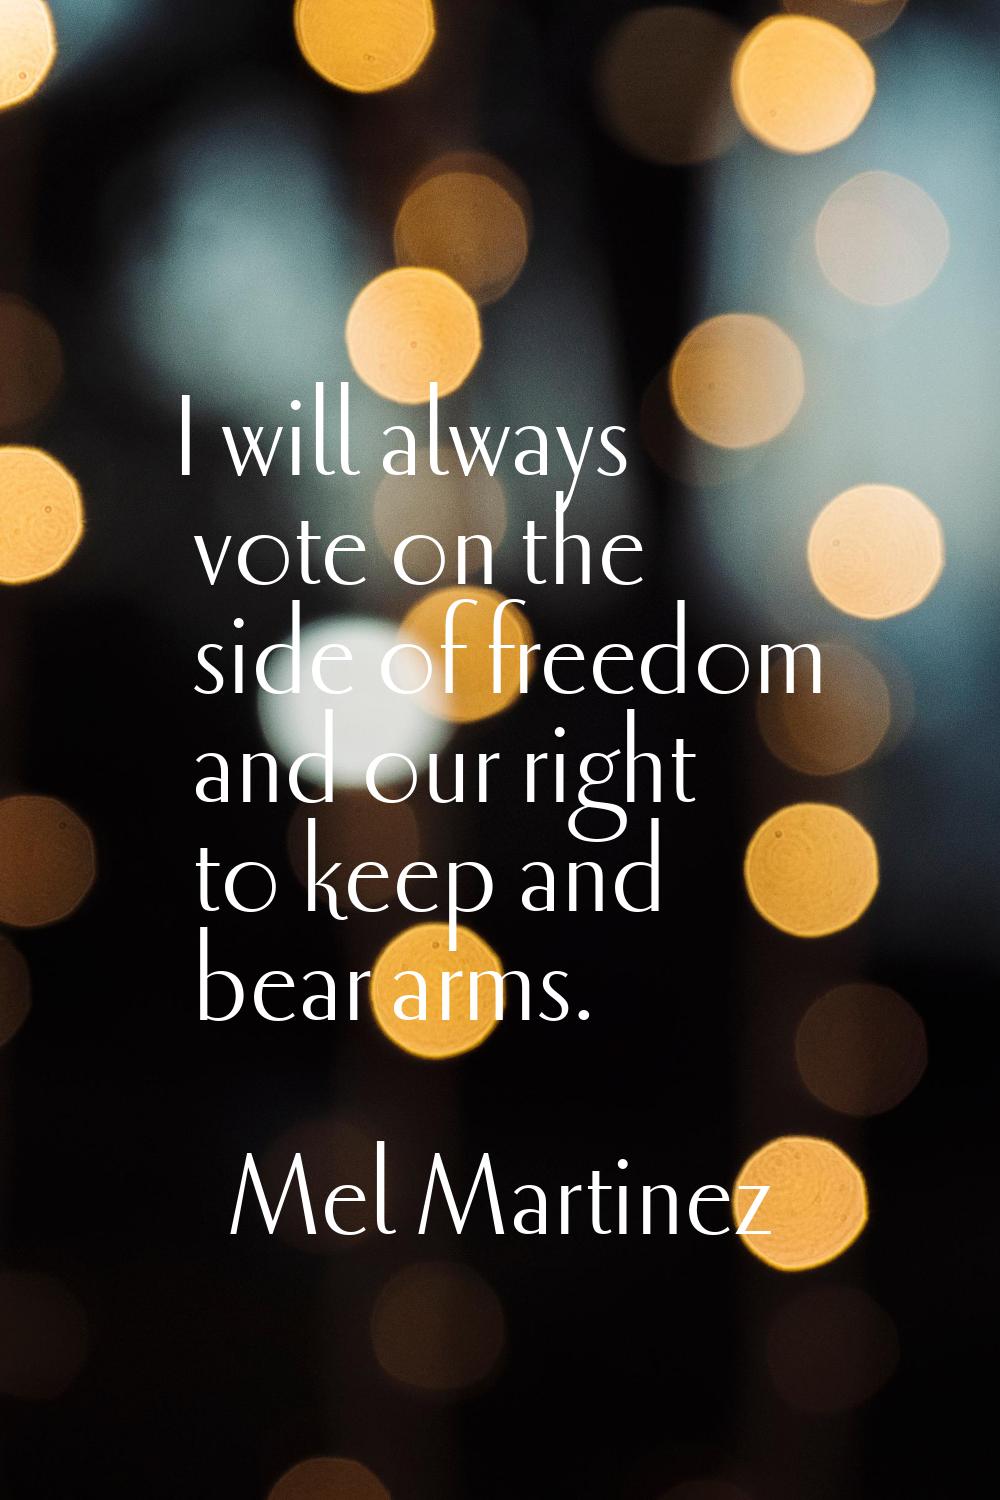 I will always vote on the side of freedom and our right to keep and bear arms.